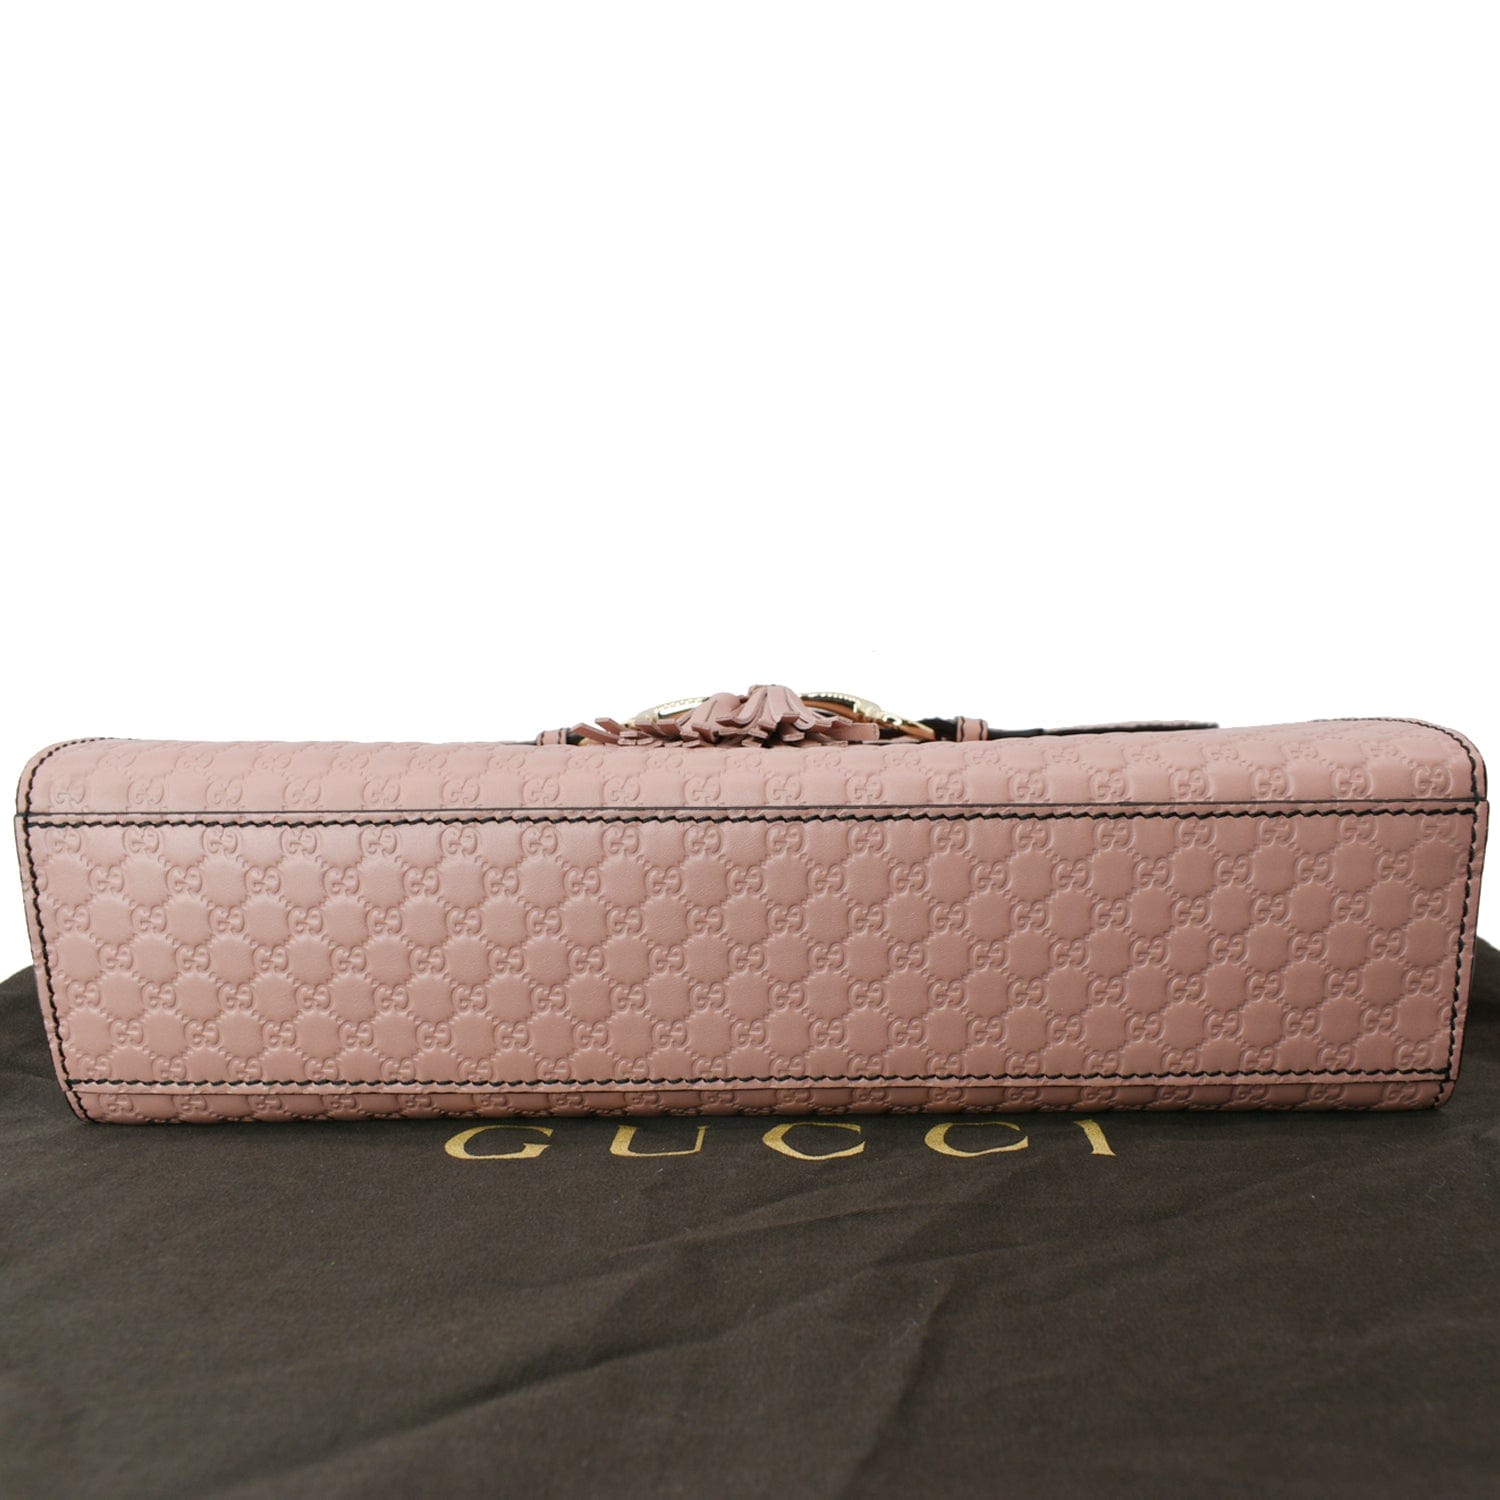 Authentic Gucci 449635 Pink Micro GG Guccissima Leather Emily Bag, Handbag.  BN